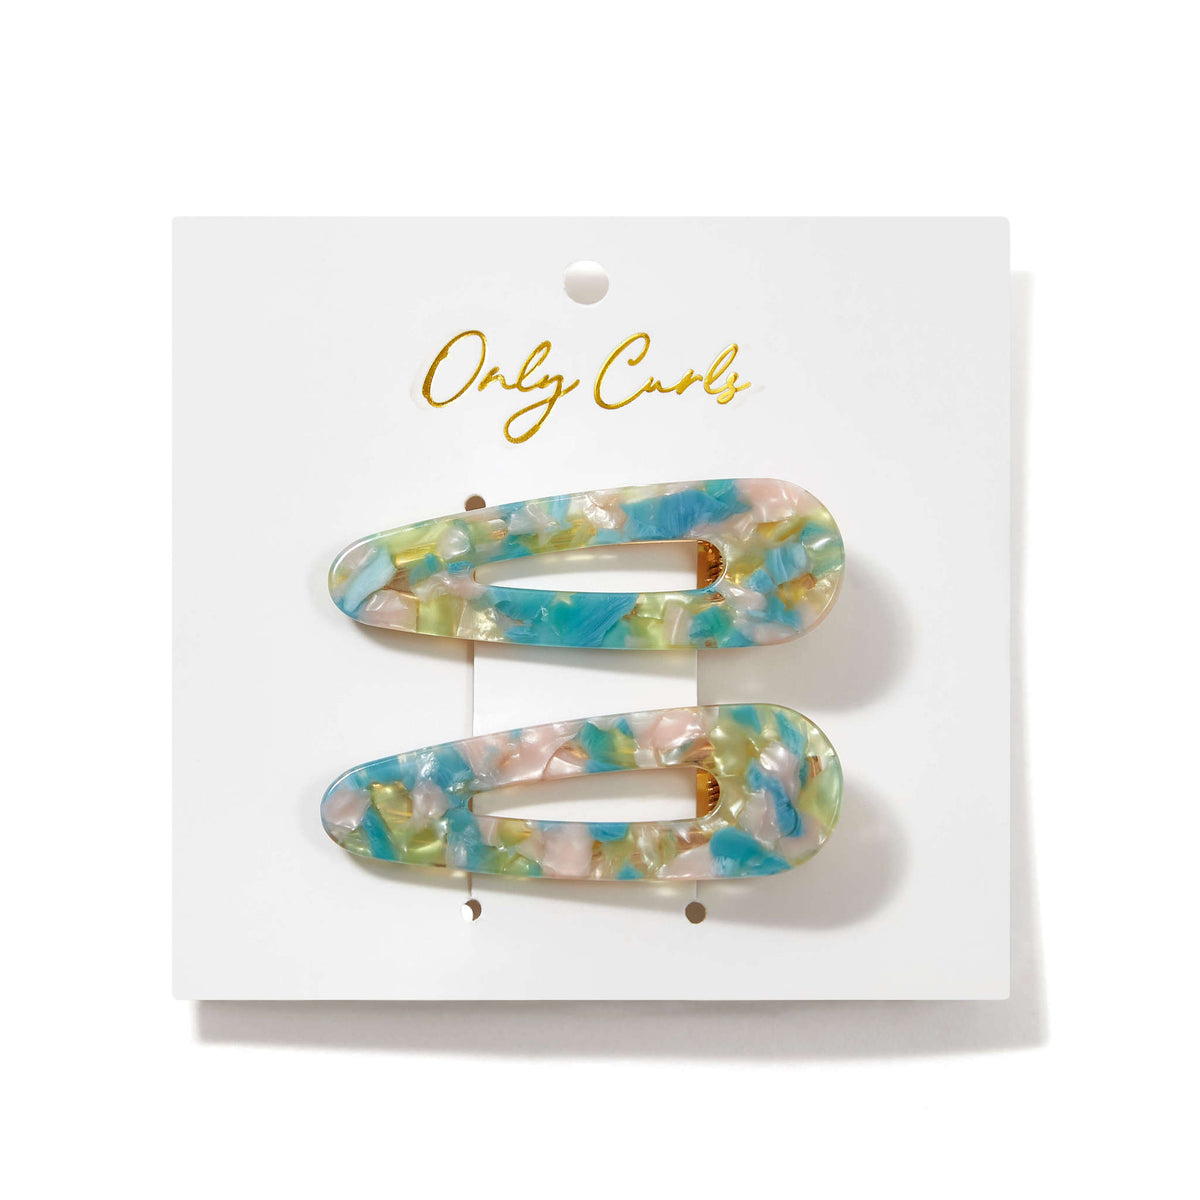 Only Curls Colour Splash Crocodile Hair Clips - Only Curls